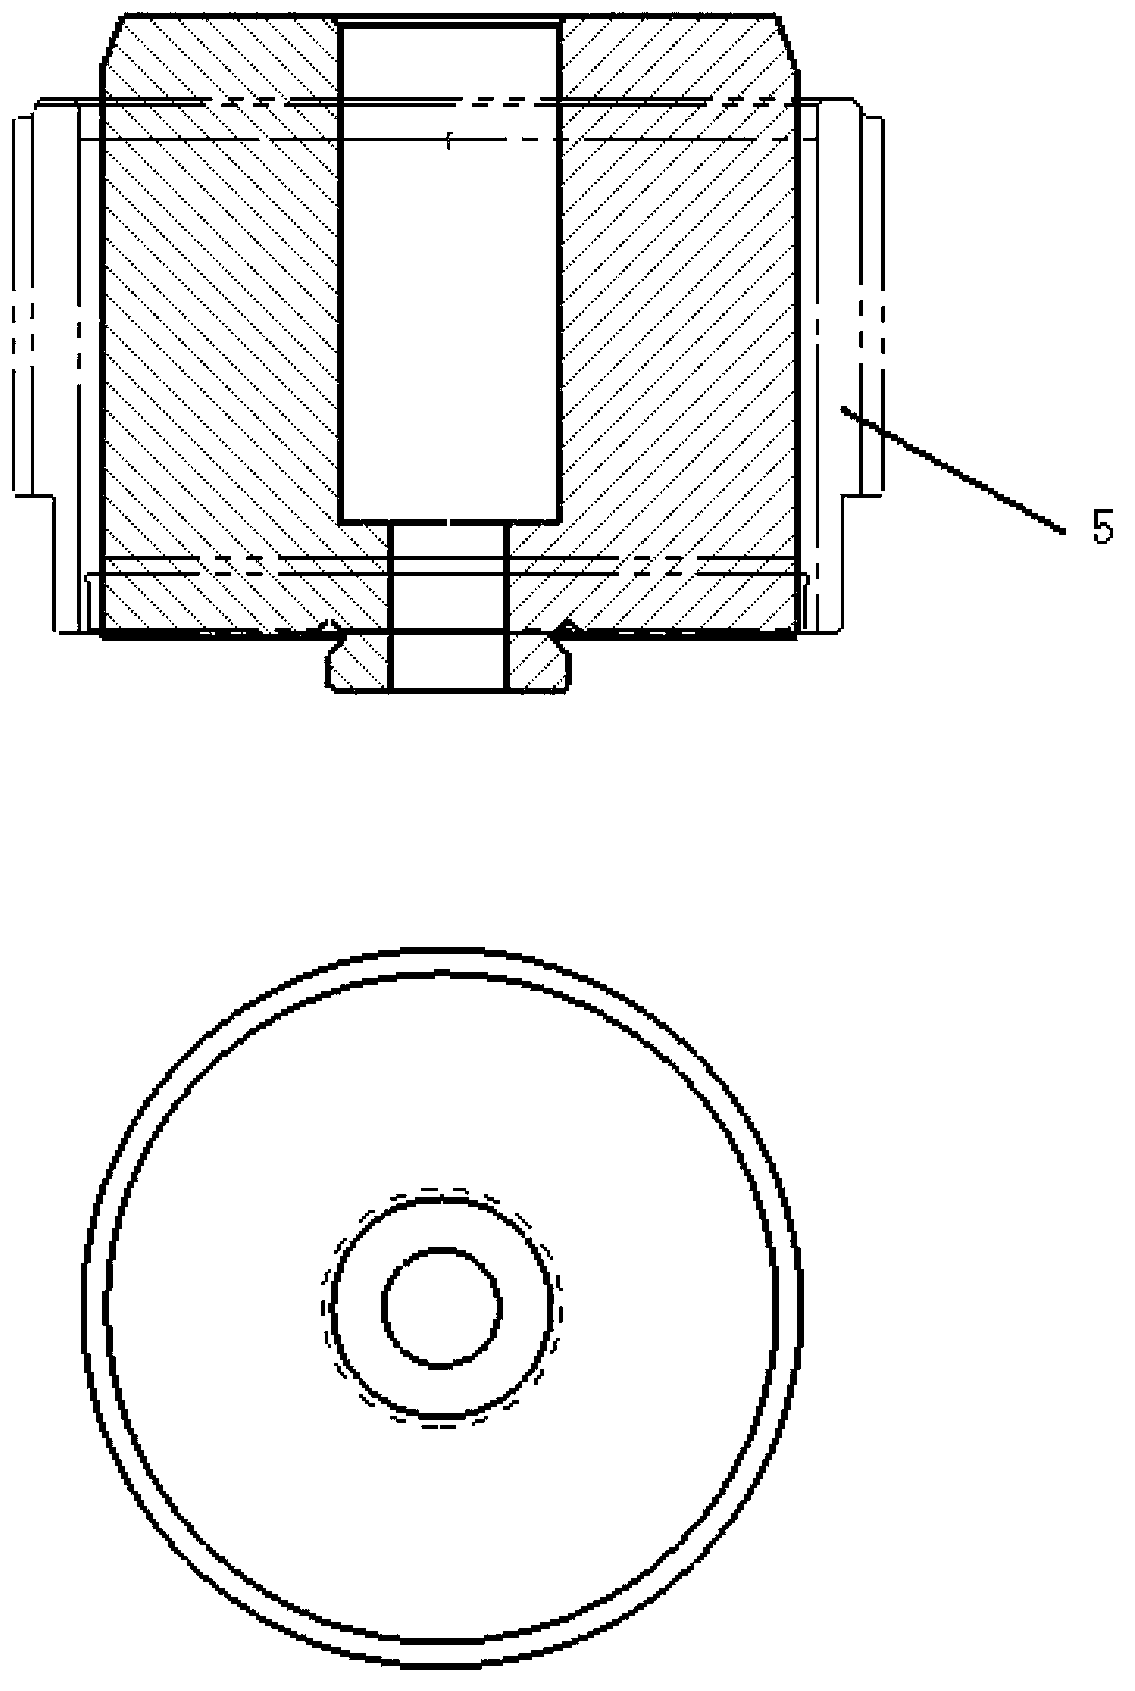 Combined pressure quenching mandrel